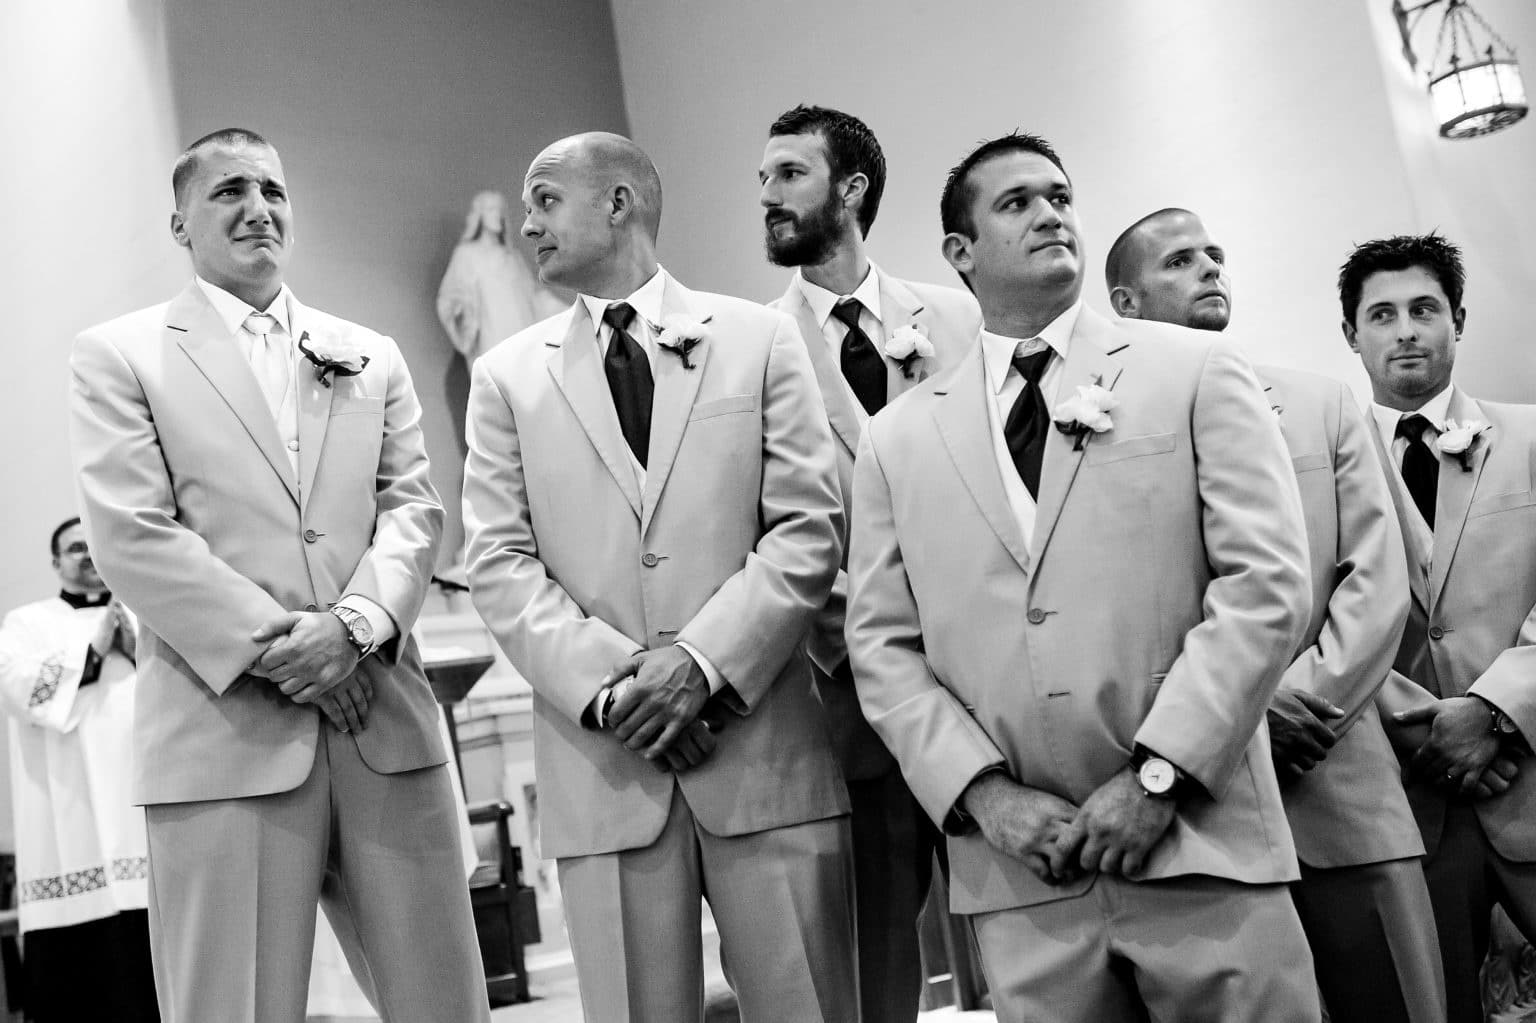 Give groomsmen look at crying groom who sees his bride walking down the aisle towards him.